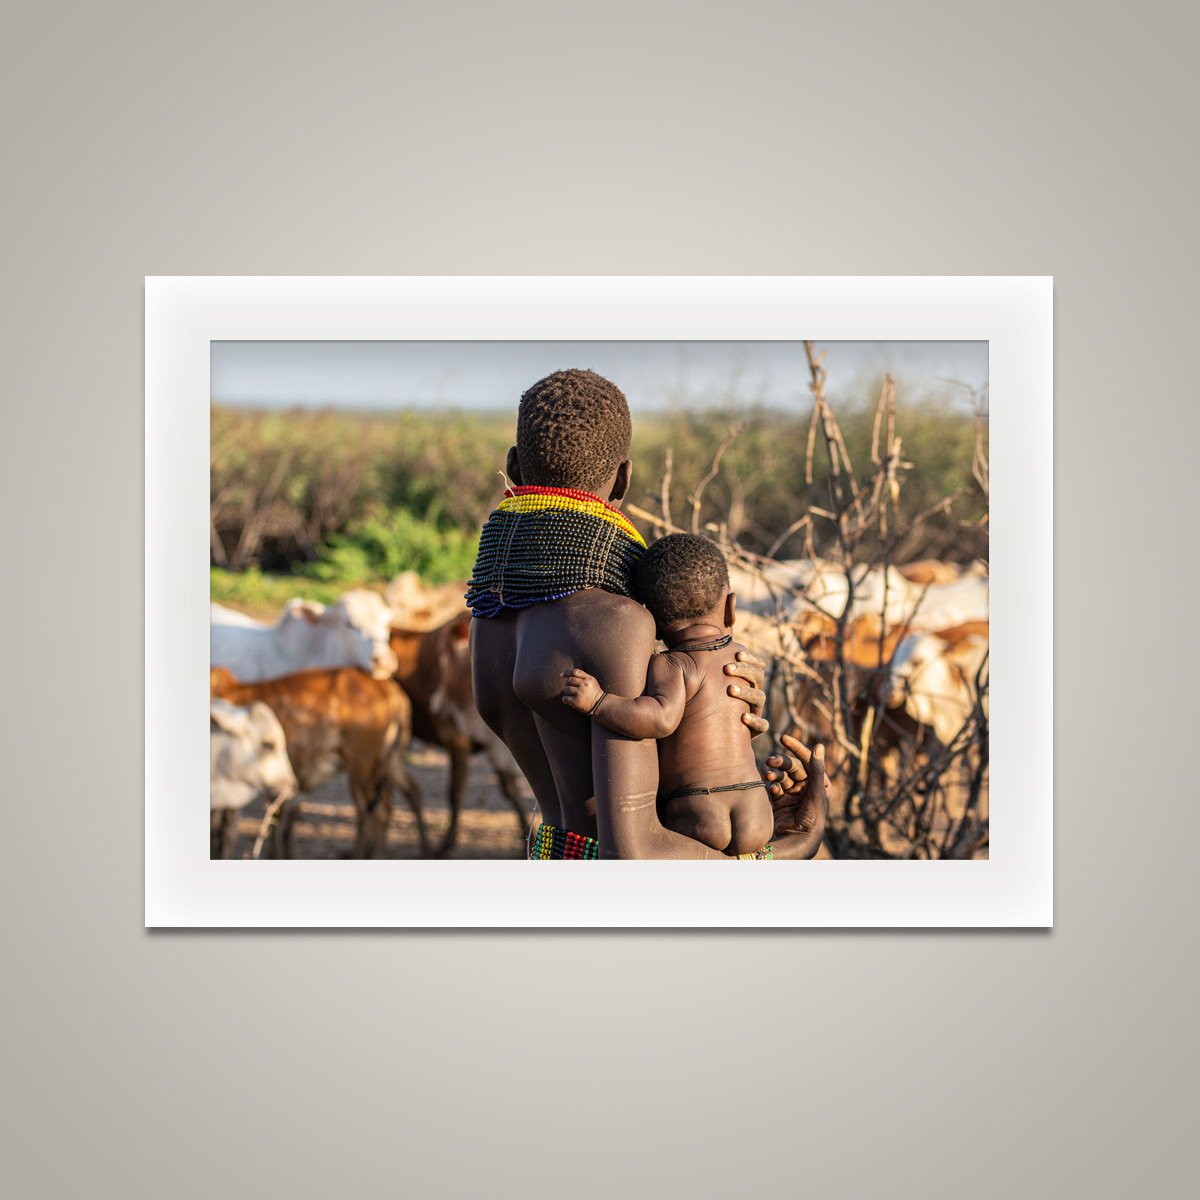 Beads & Baby - Omo Valley